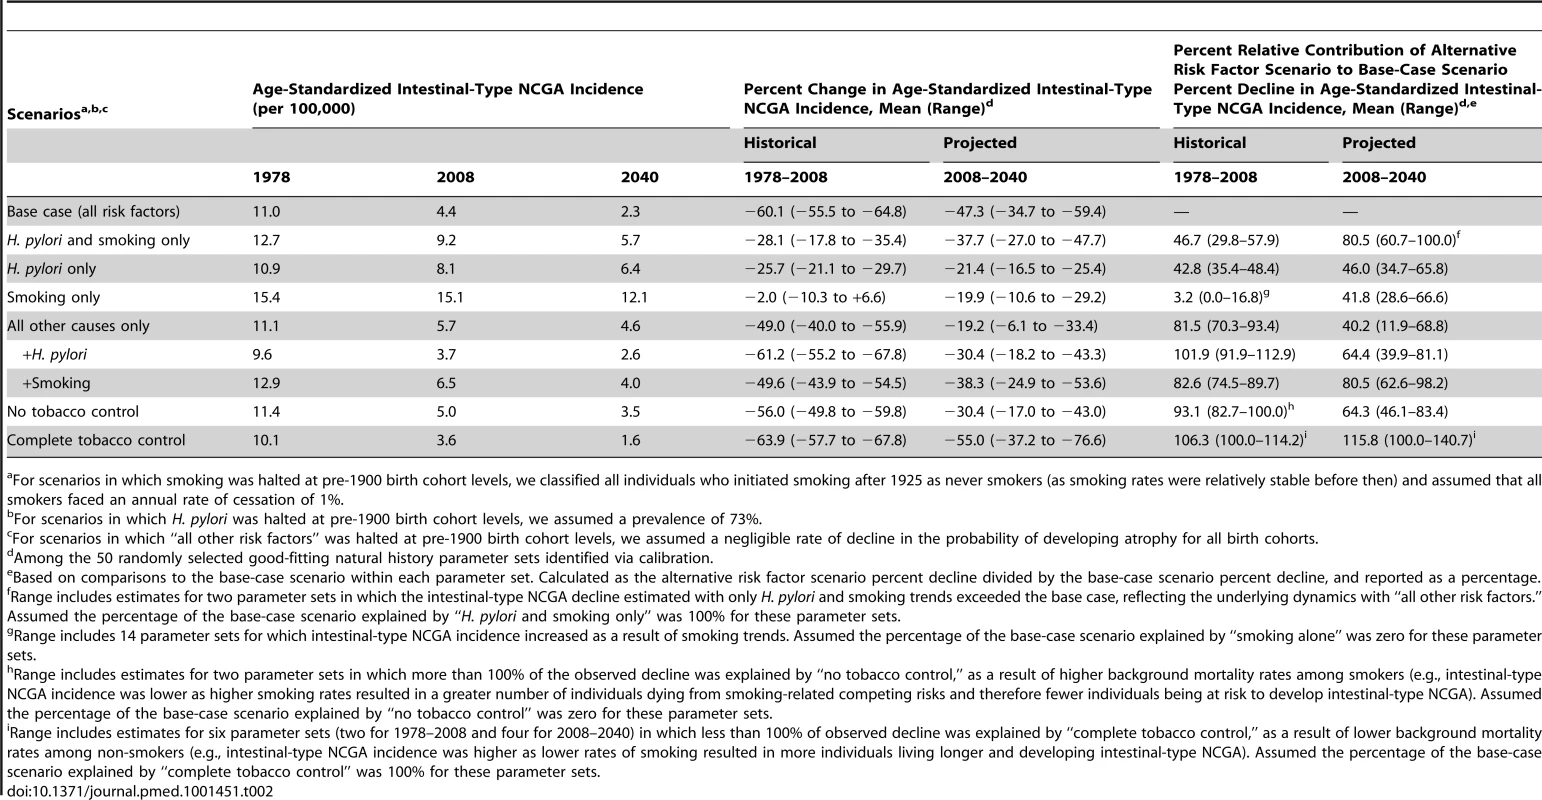 Modeled intestinal-type NCGA outcomes between 1978 and 2040: age-standardized incidence, percent change in incidence, and relative contribution of alternative risk factor scenarios to the base-case scenario percent decline in incidence.